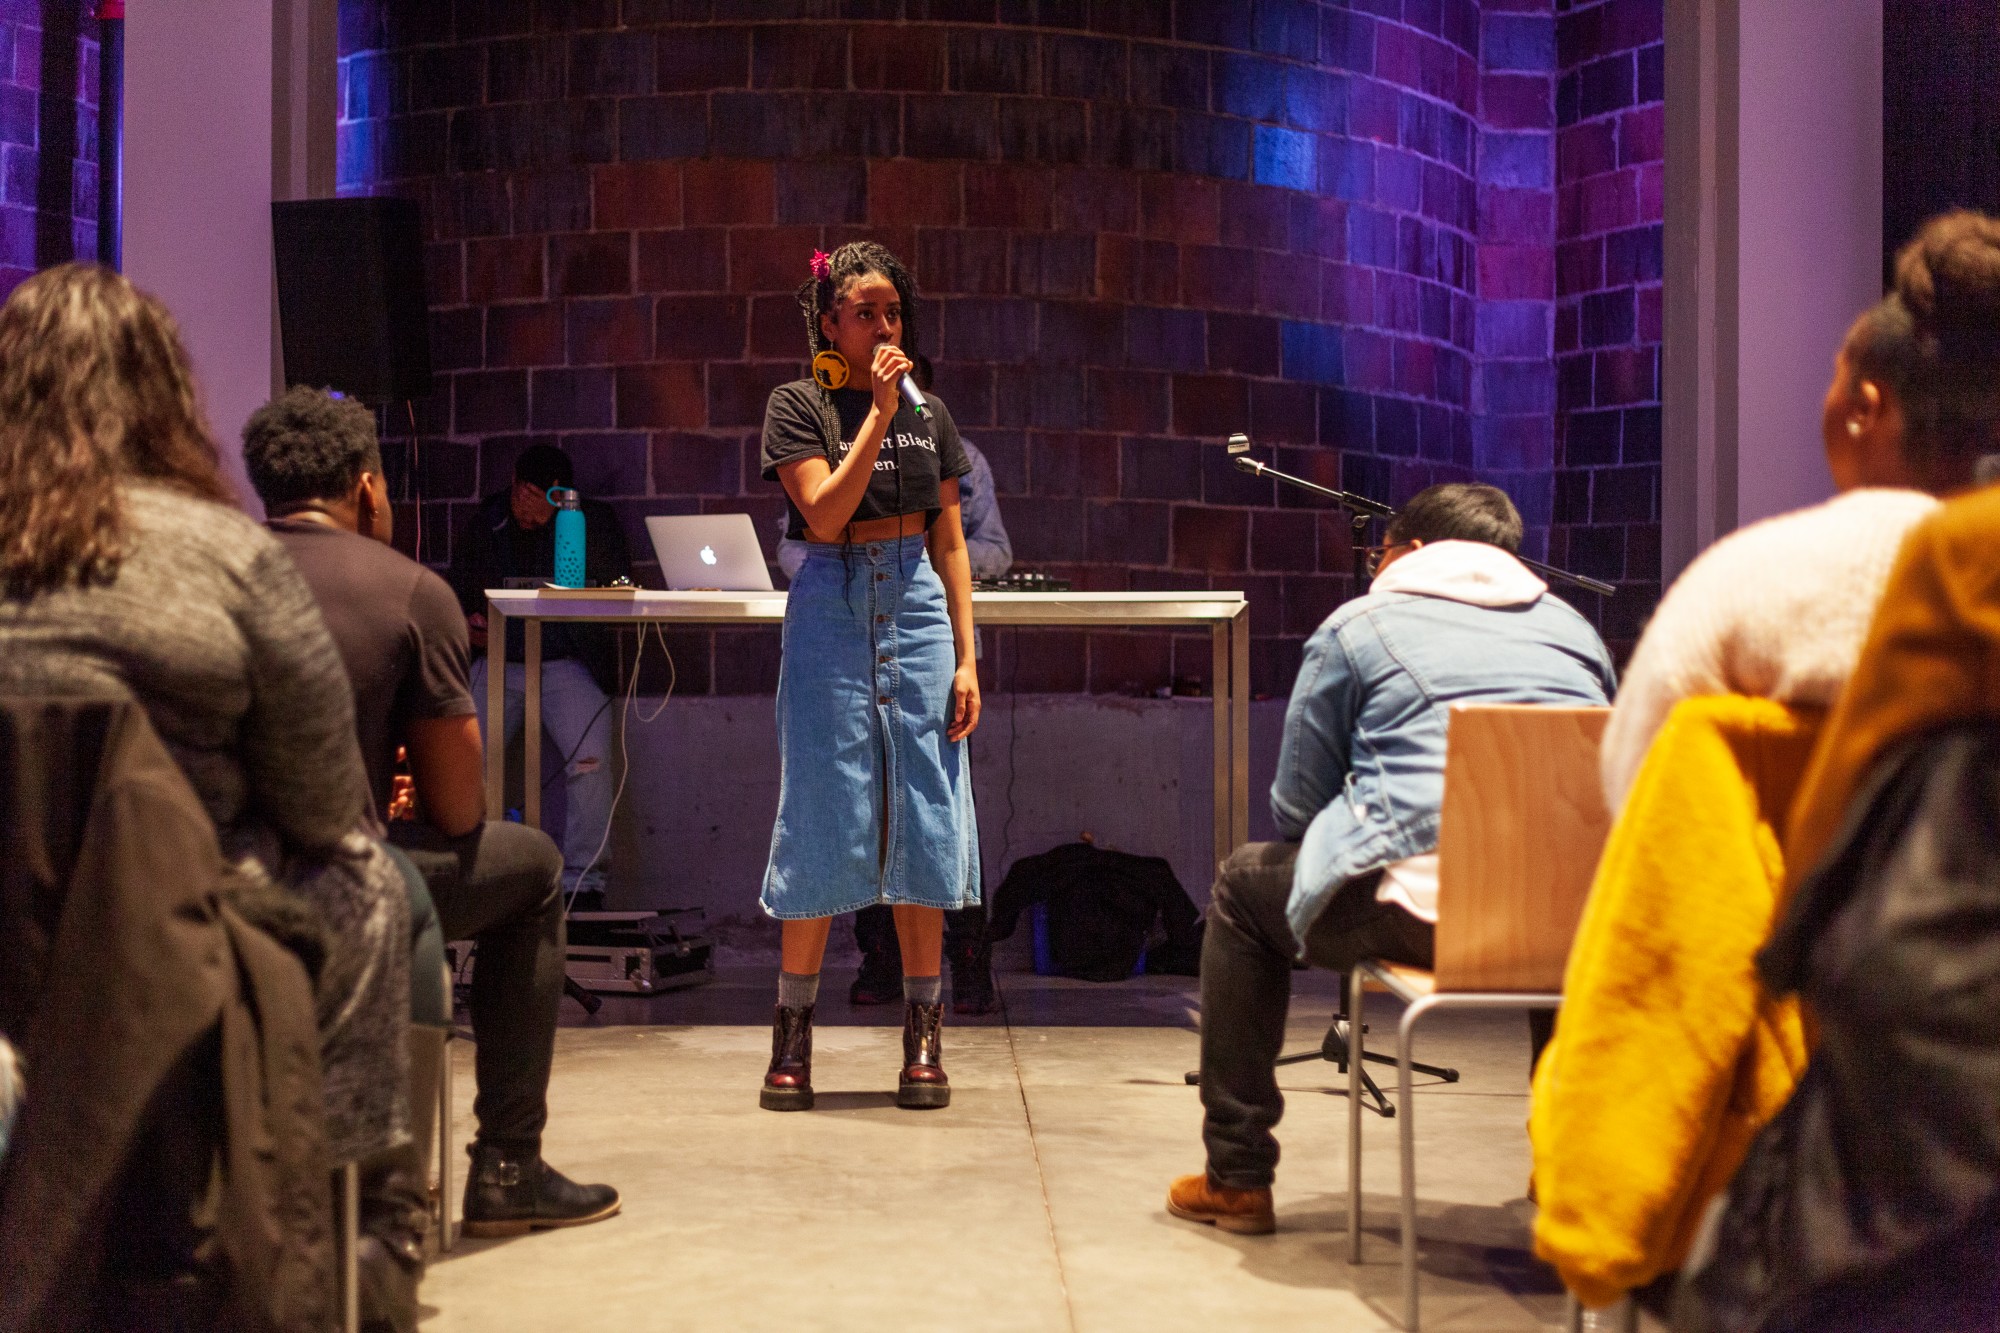 Co-organizer Ricki Williams addresses the audience at the Tangible Thoughts Open Mic event at A-Mill Artist Lofts on Saturday, Feb. 15. The recurring event serves as a platform to highlight black thought and expression in the Twin Cities.